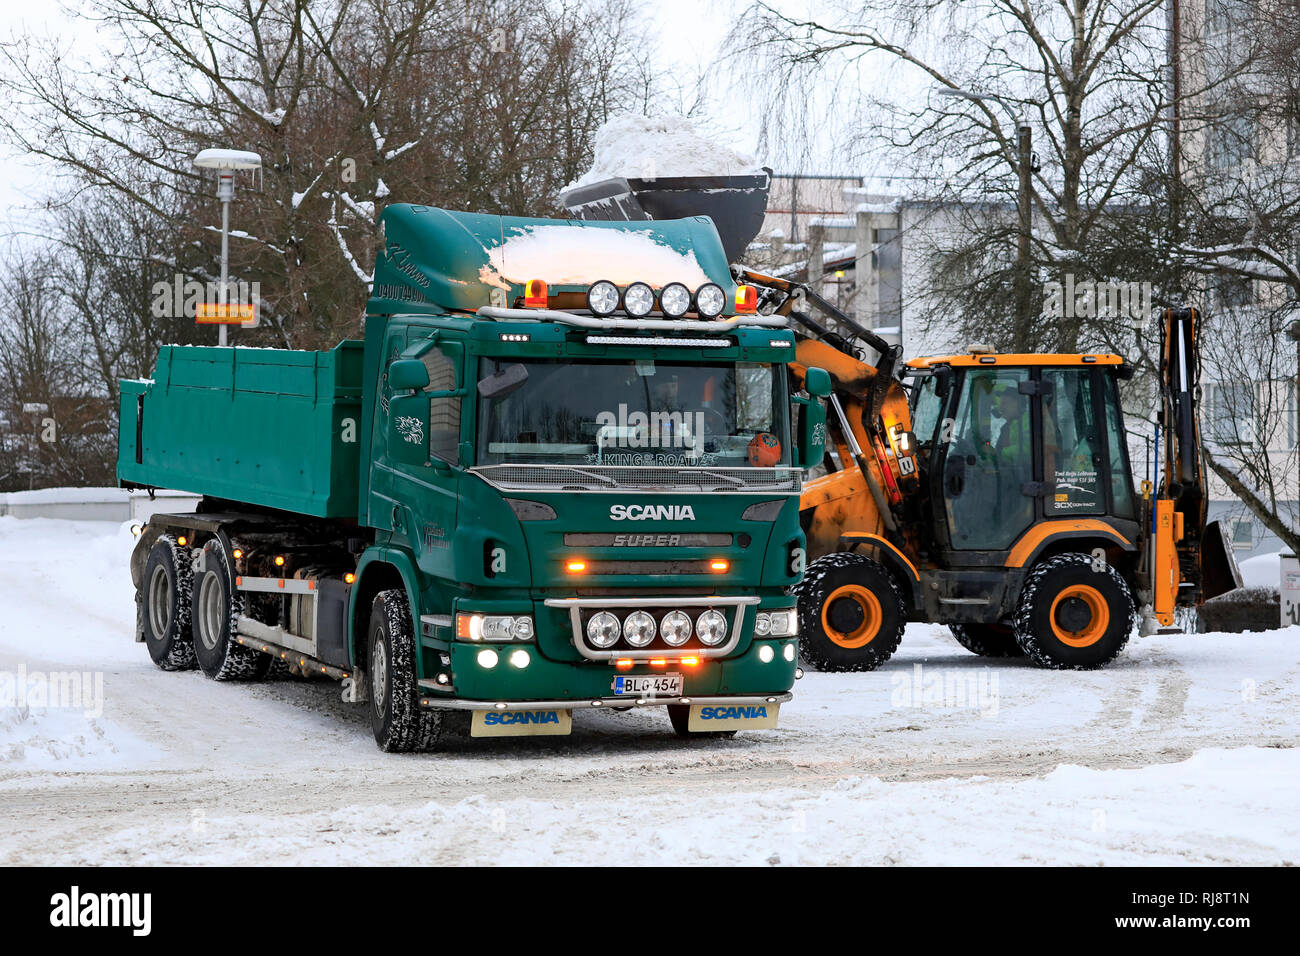 Salo, Finland - February 2, 2019: JCB loader loads snow onto green Scania P420 dump truck trailer to be transported to a snow dumping area. Stock Photo